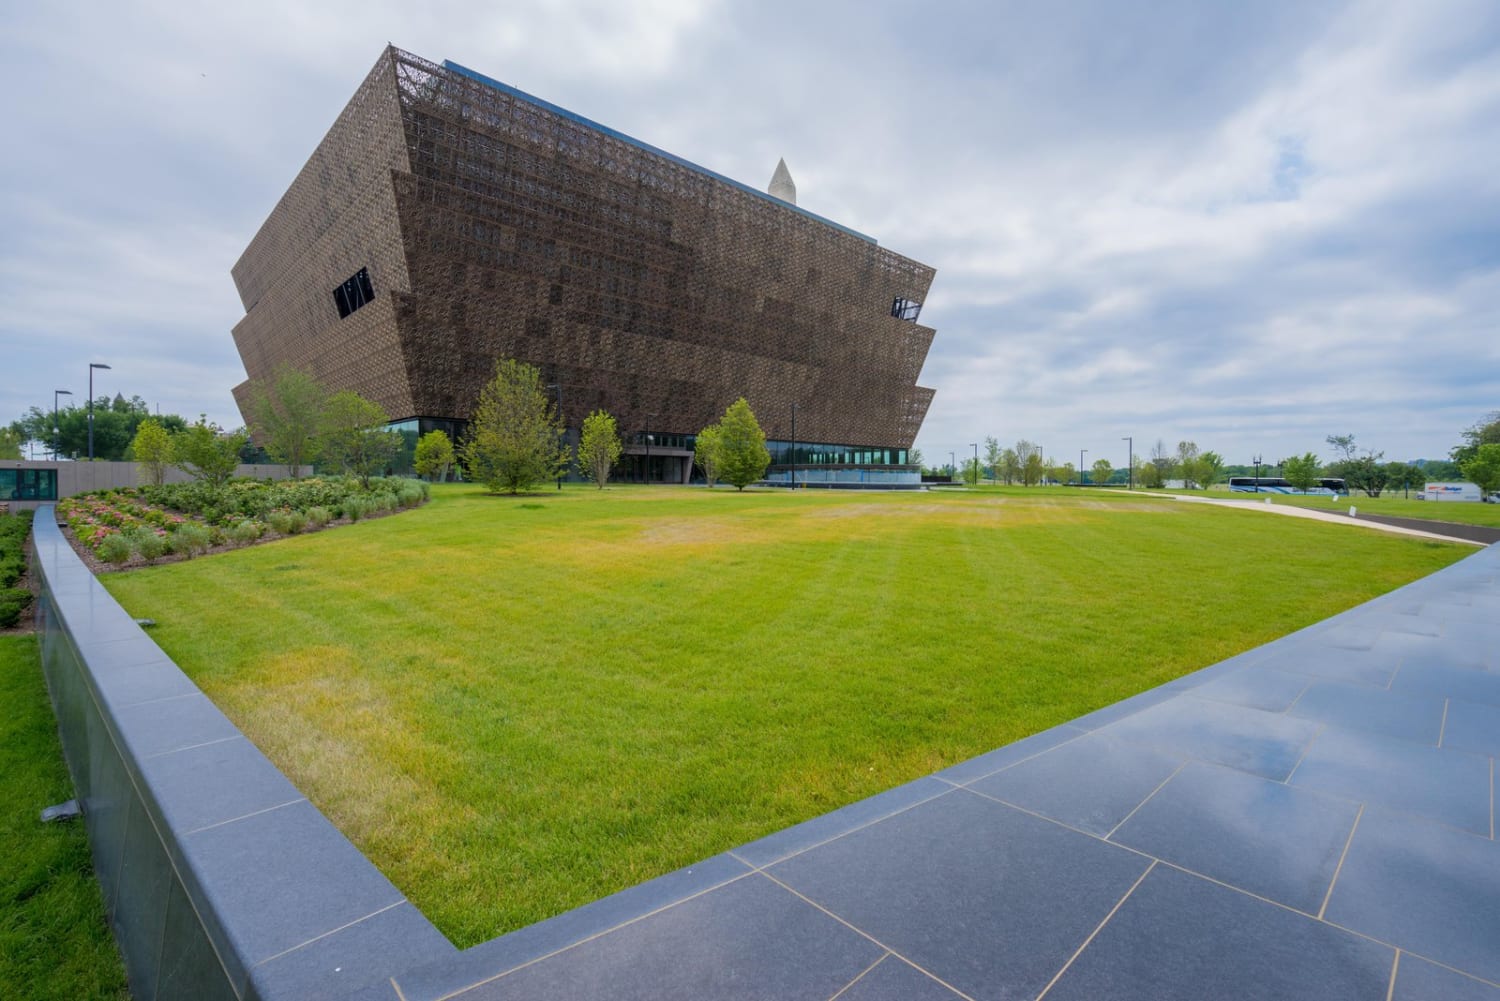 Tips for Getting Tickets to NMAAHC and When They Are Not Necessary